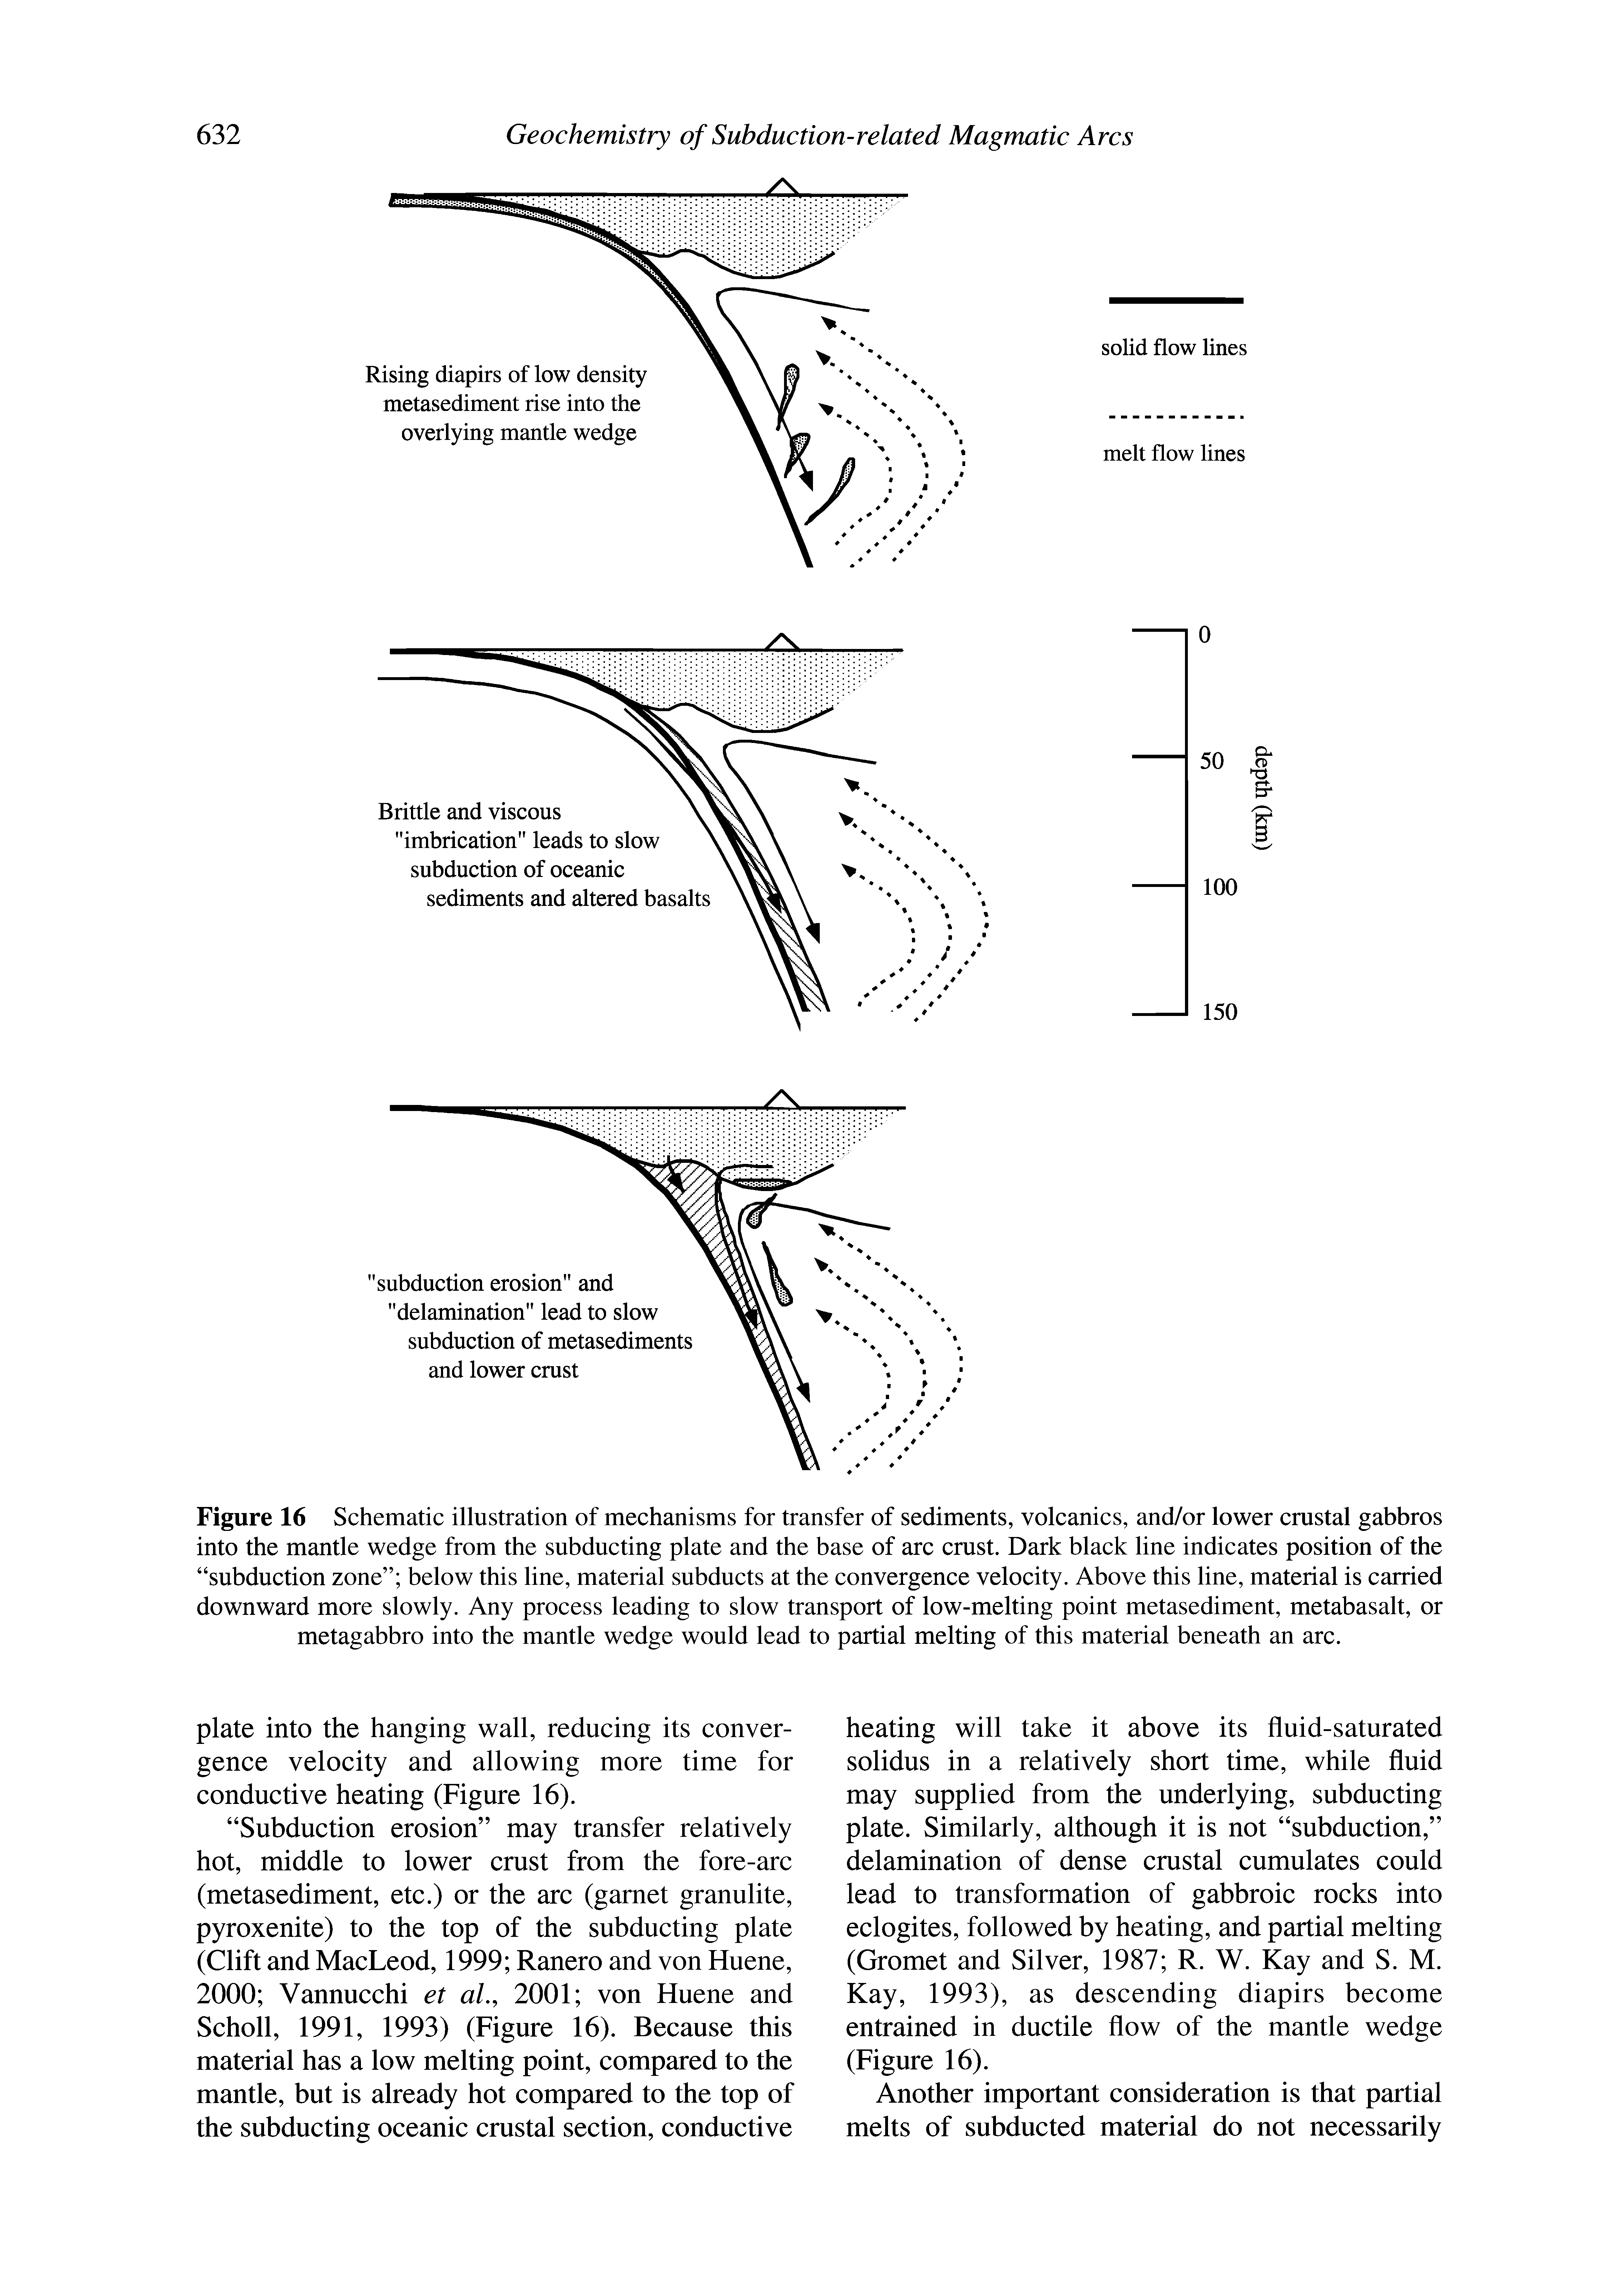 Figure 16 Schematic illustration of mechanisms for transfer of sediments, volcanics, and/or lower erustal gabbros into the mantle wedge from the subducting plate and the base of arc crust. Dark black line indicates position of the subduction zone below this line, material subducts at the convergence velocity. Above this line, material is carried downward more slowly. Any process leading to slow transport of low-melting point metasediment, metabasalt, or metagabbro into the mantle wedge would lead to partial melting of this material beneath an arc.